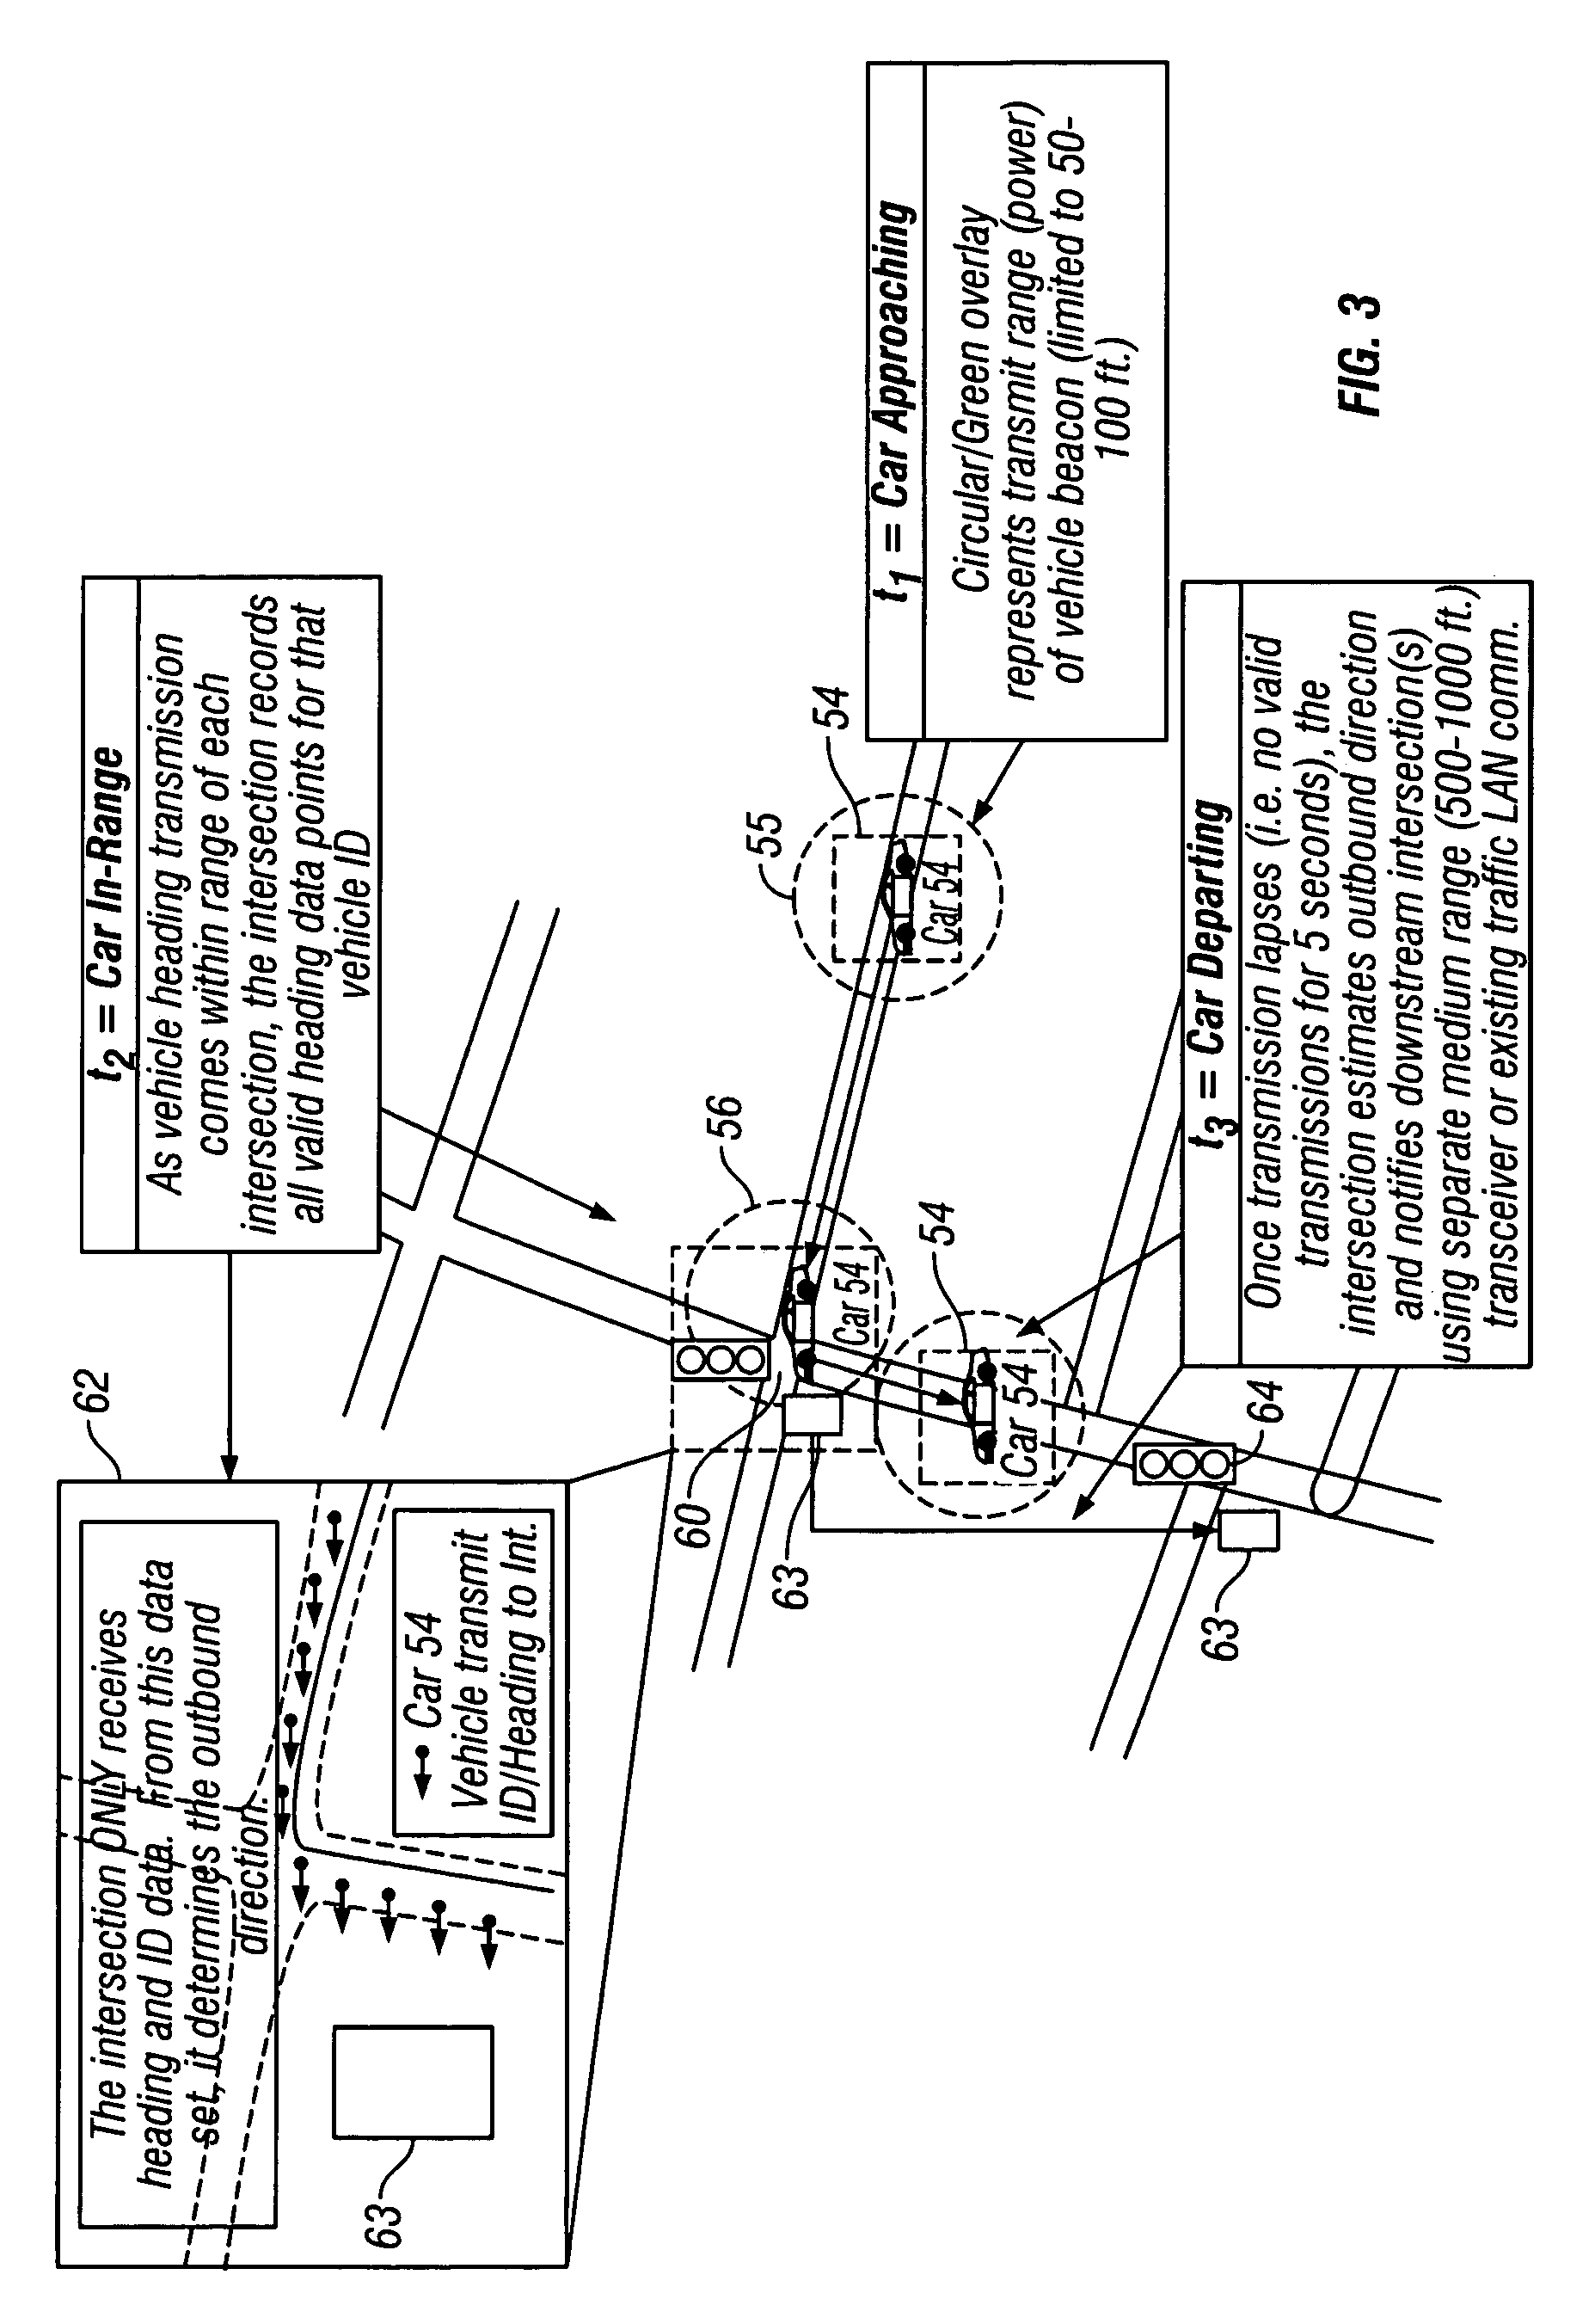 Method and system for beacon/heading emergency vehicle intersection preemption